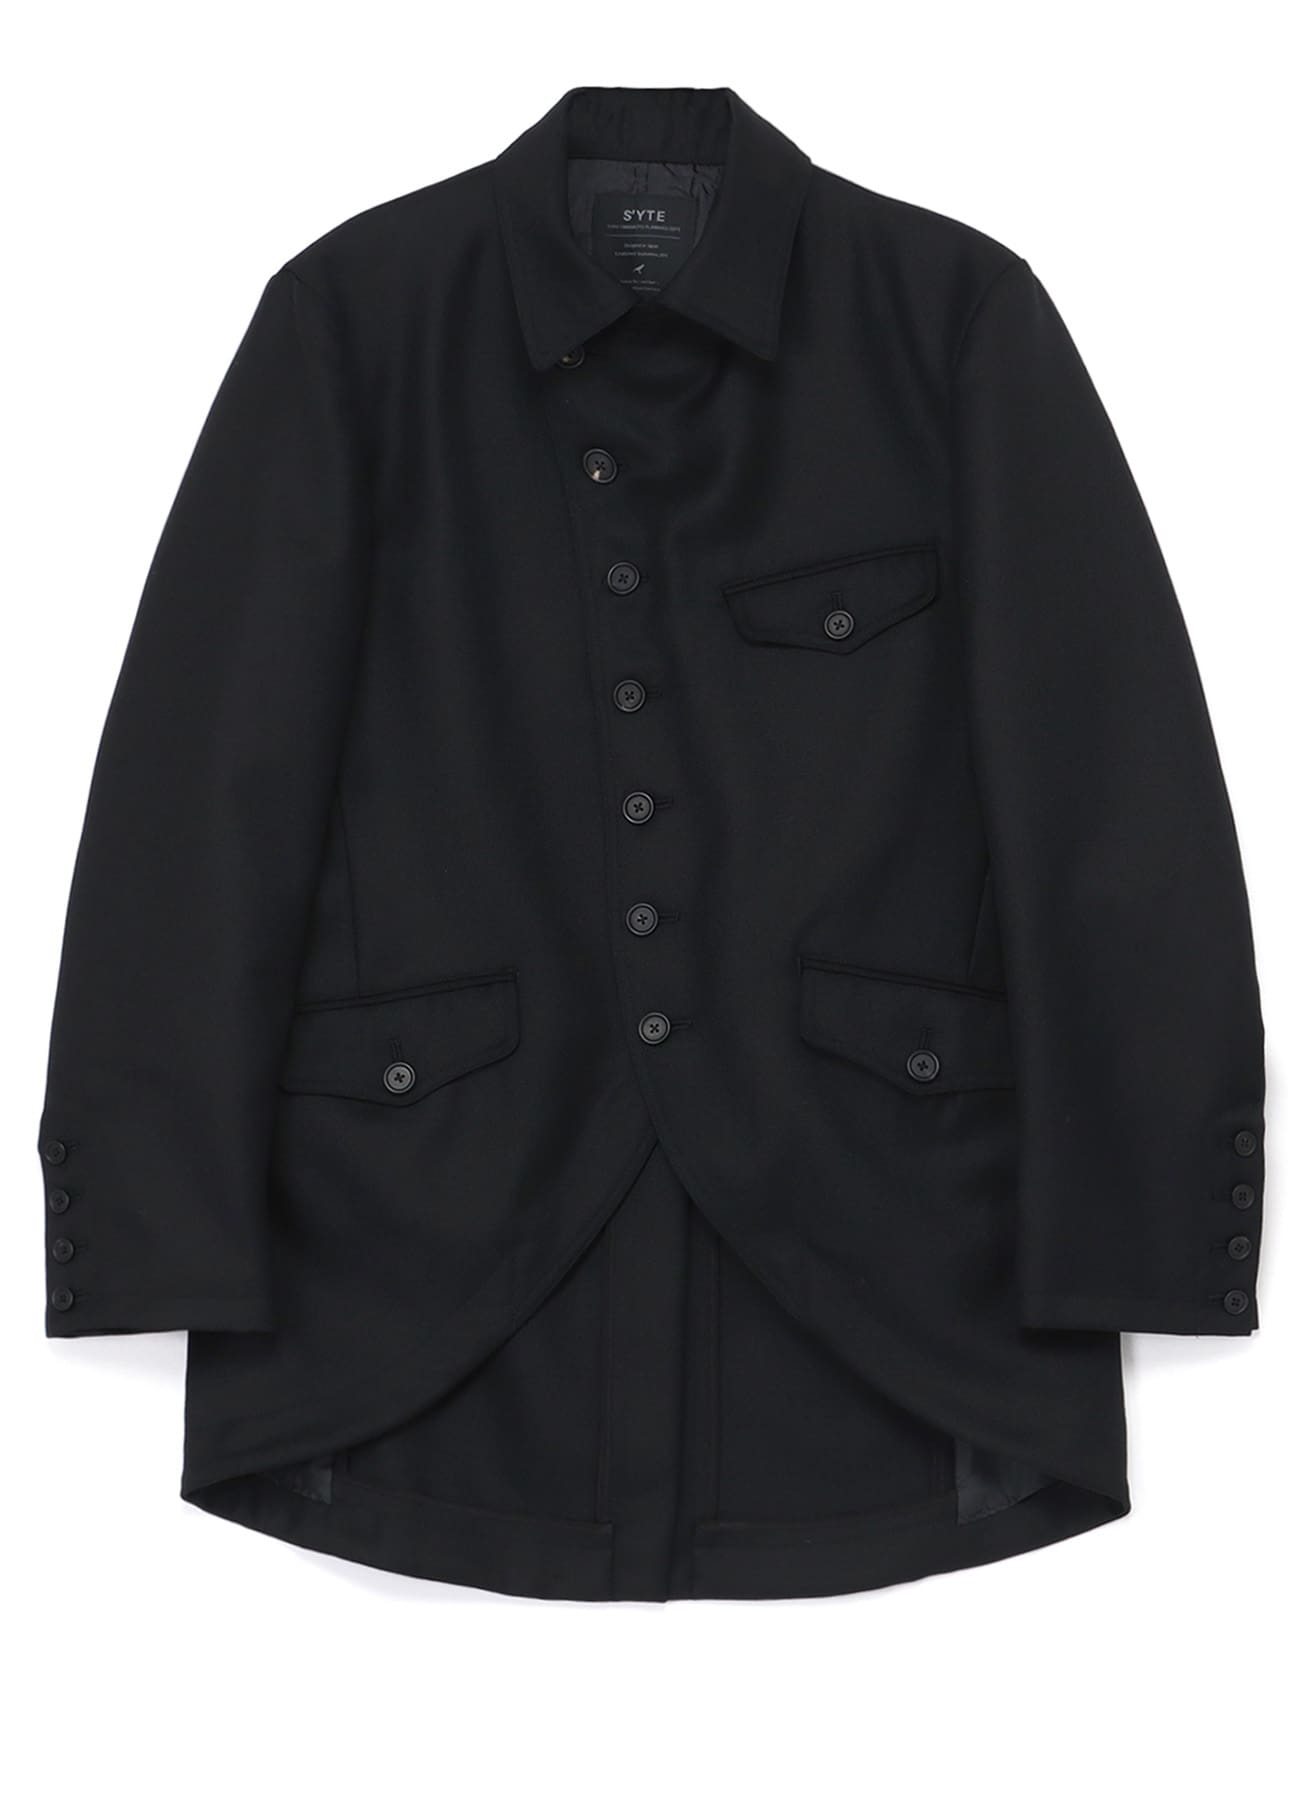 WOOL SURGE SEMI-DOUBLE-BREASTED JACKET(M Black): S'YTE｜THE SHOP